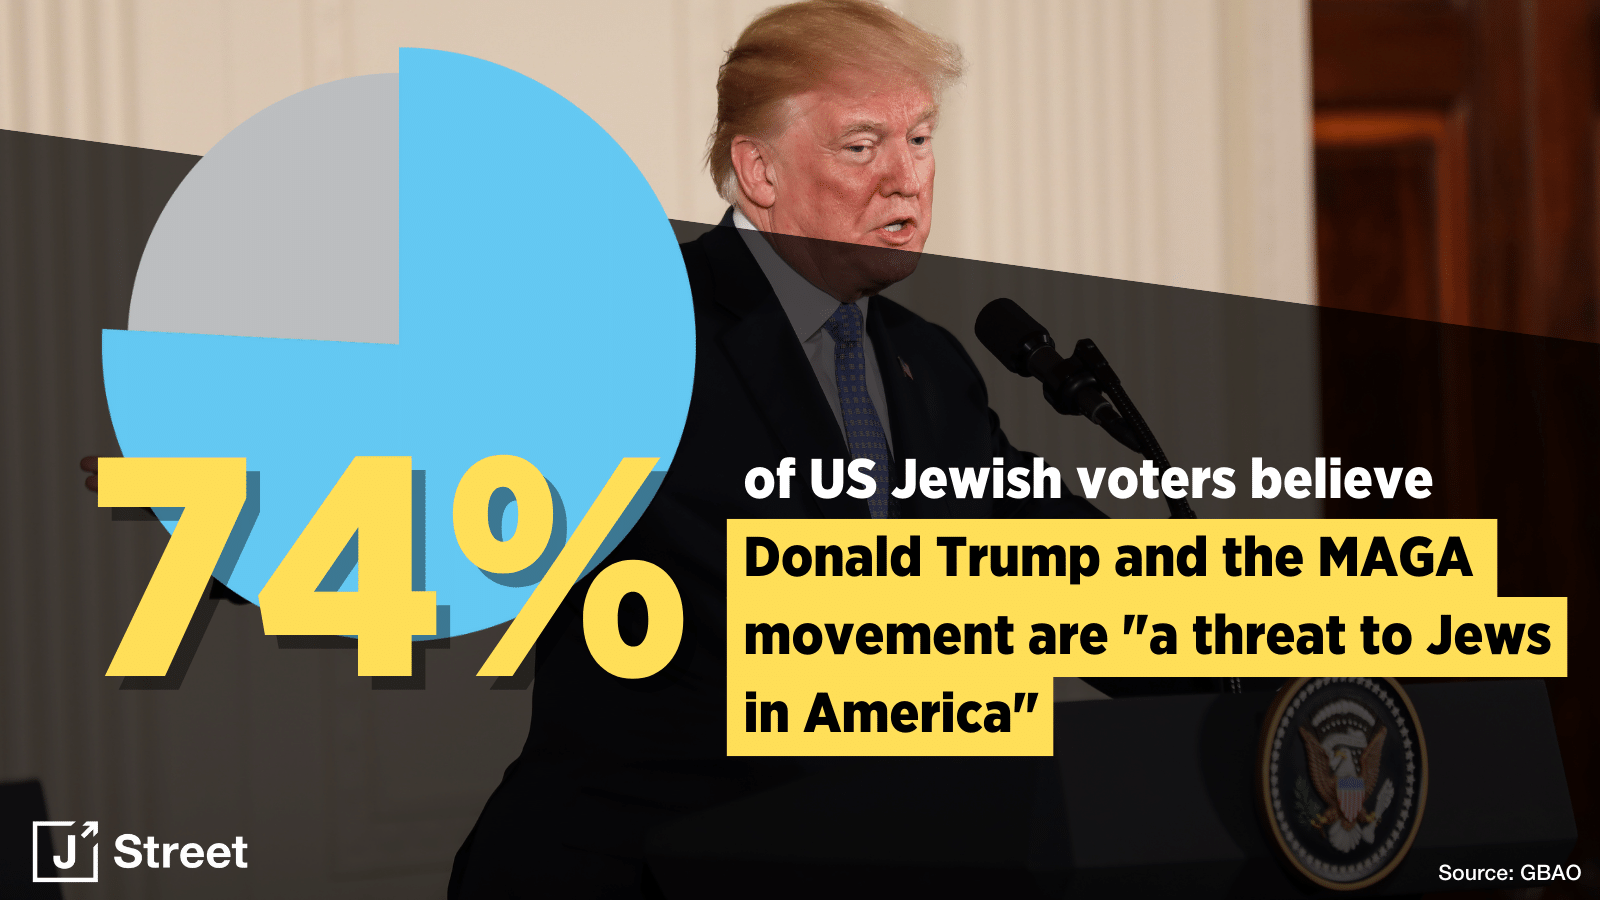 74% believe Donald Trump and the MAGA movement are a threat to Jews.